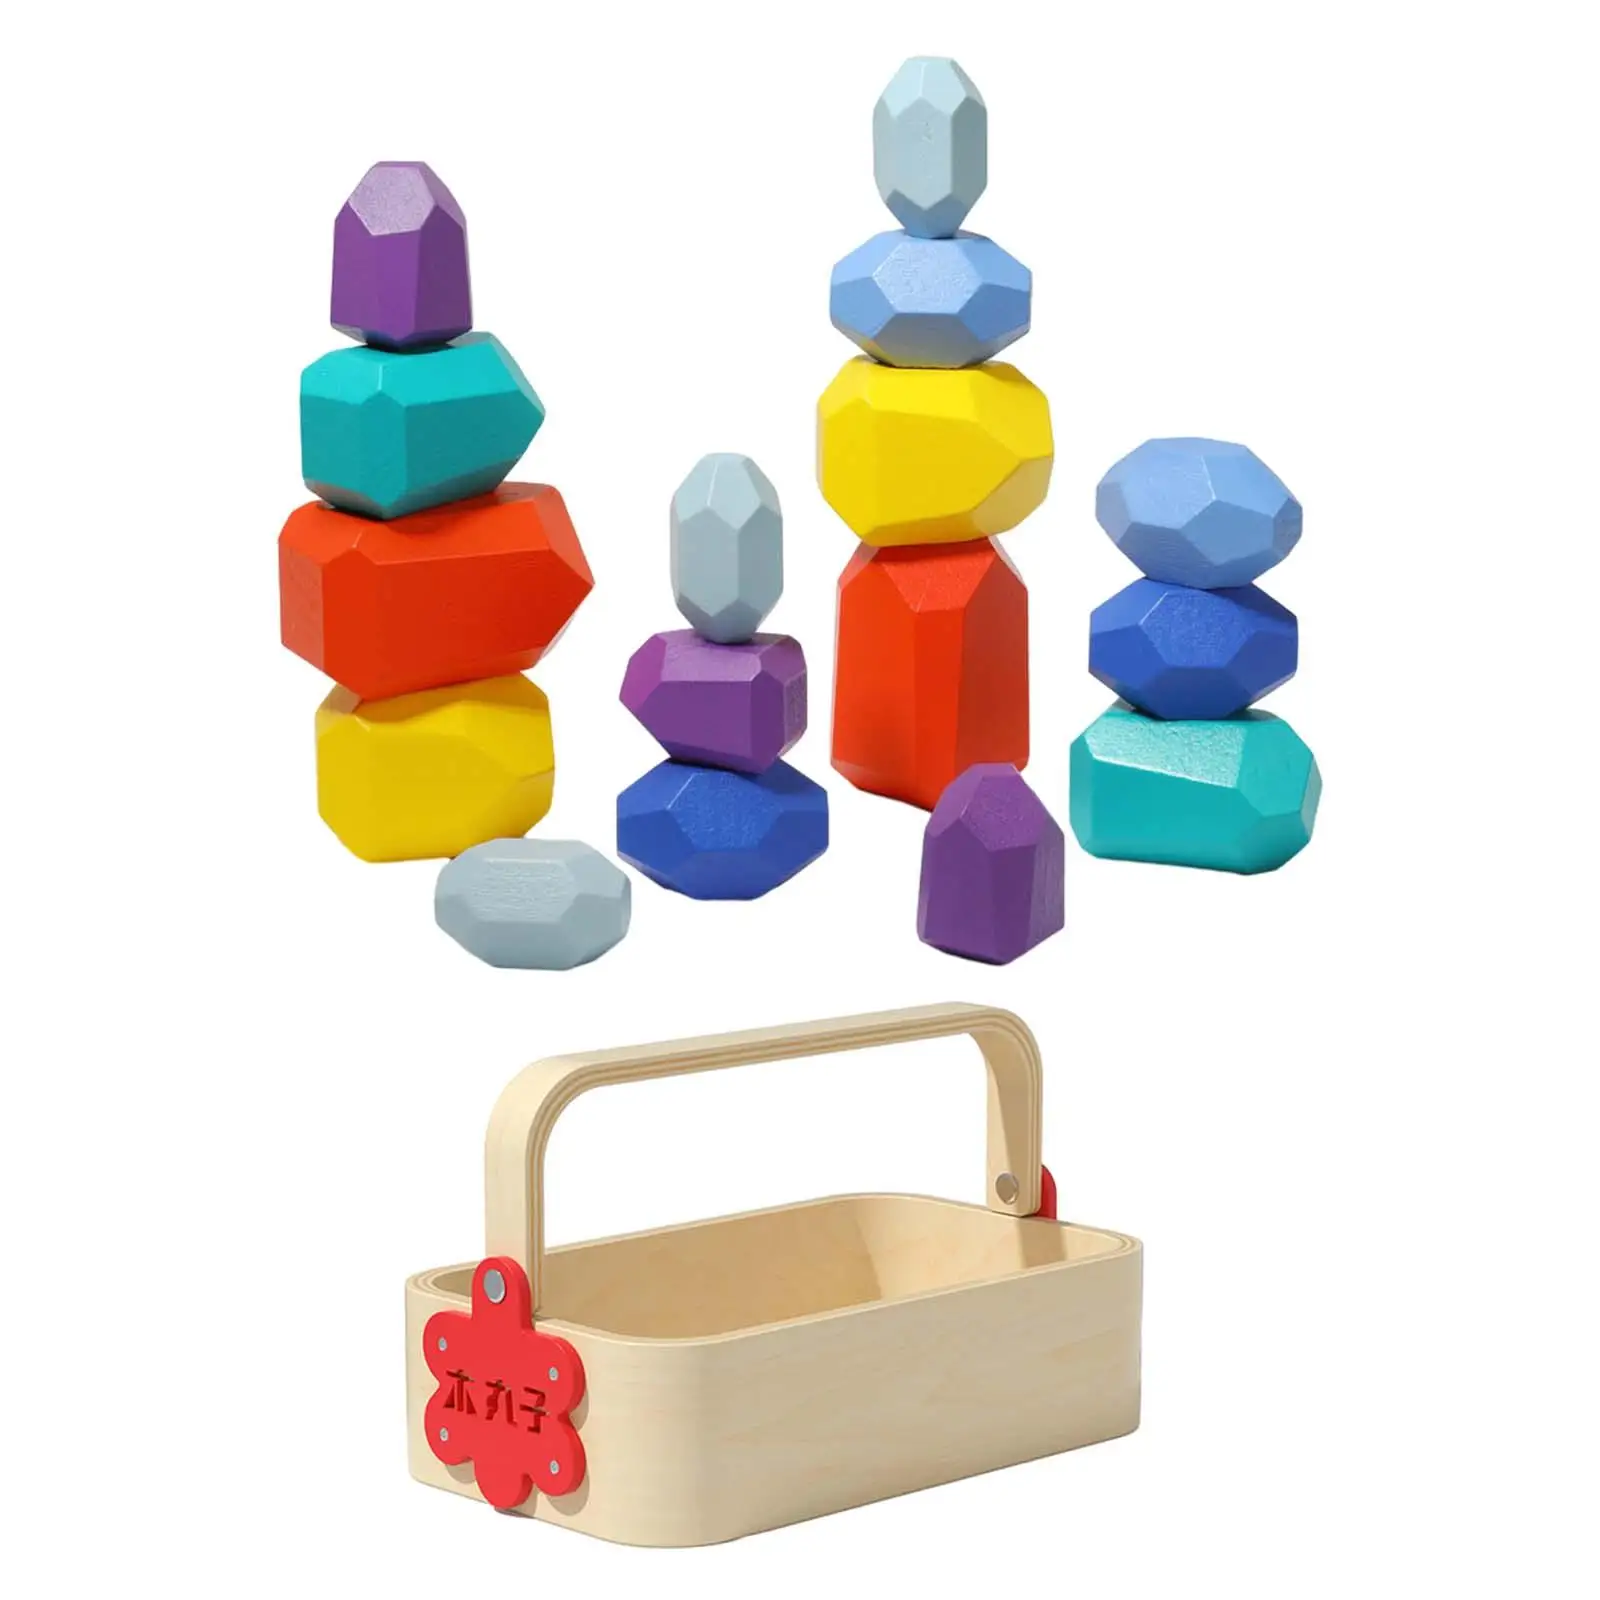 Stacking Blocks Promotes Creativity Puzzle Toys Montessori Toys Balance Stones for Children Girls Kid 3 Years up Holiday Gifts